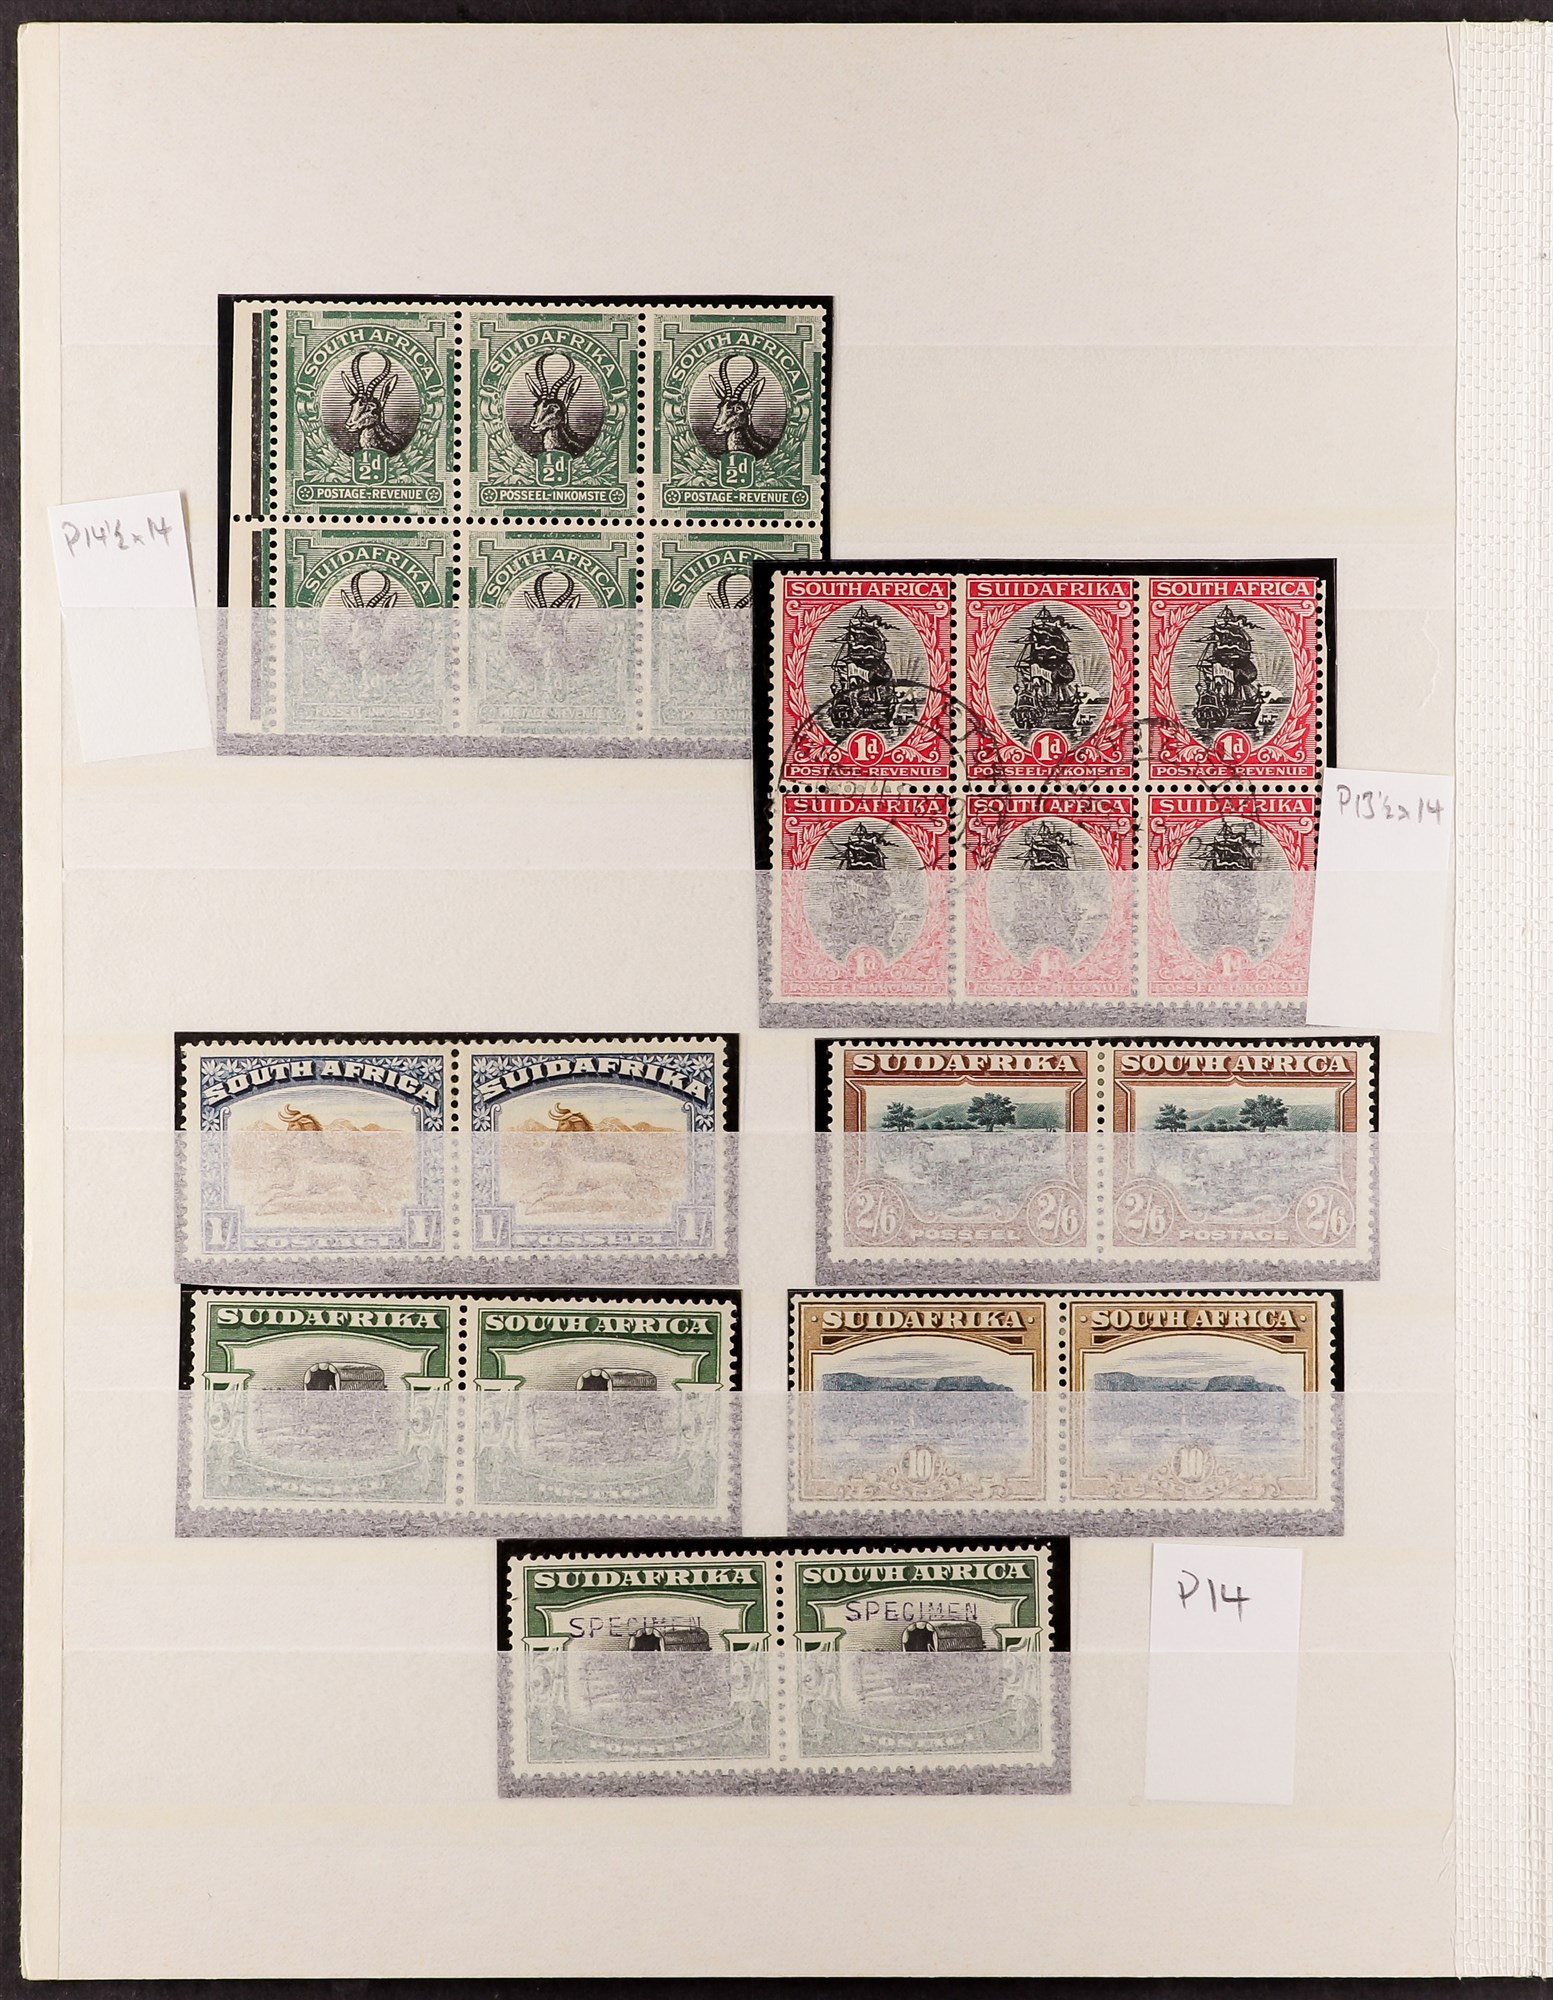 SOUTH AFRICA 1926-54 MINT DEFINITIVES COLLECTION note 1926-7 ½d & 1d block of four with extra - Image 2 of 4